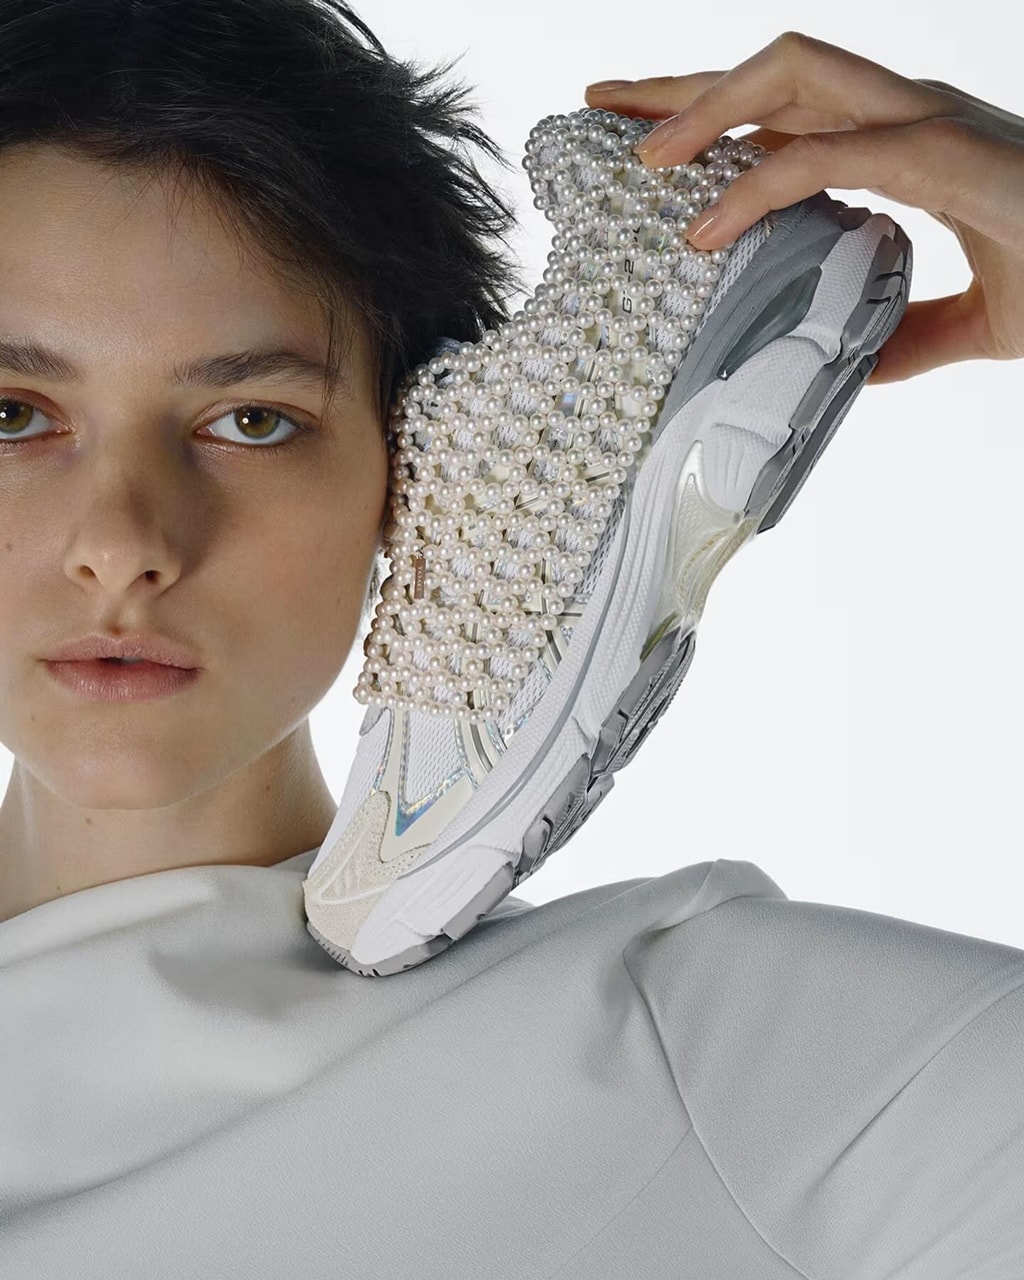 The Tasaki x ASICS GT-2160 Is Covered in Pearls | Hypebeast